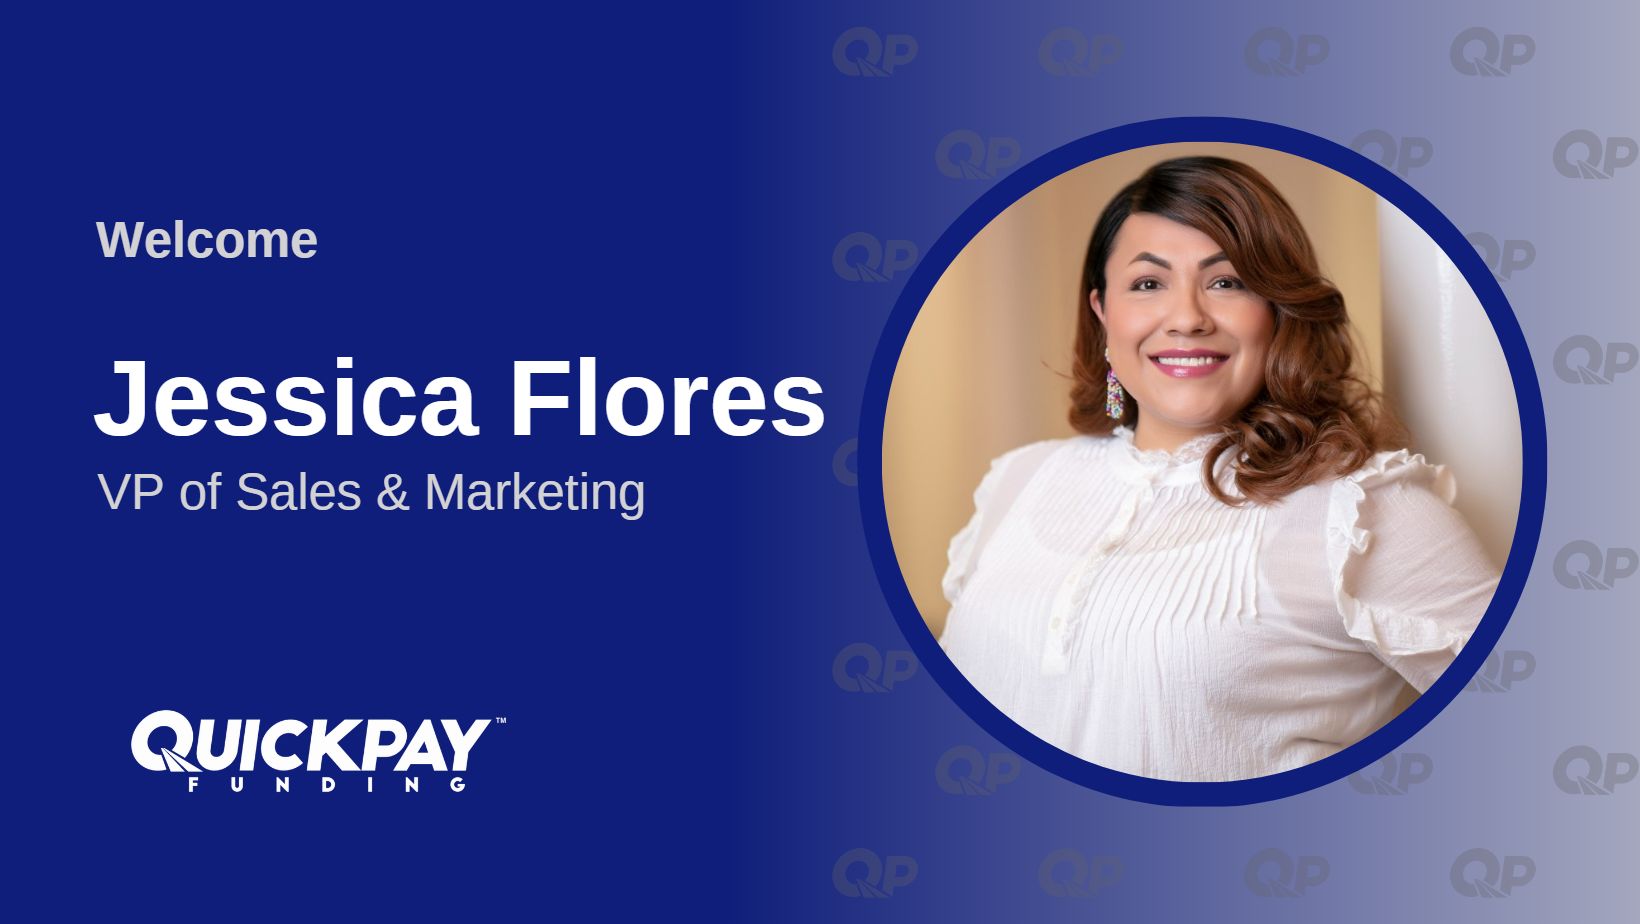 Quickpay welcomes Jessica Flores as Vice President of Sales and Marketing